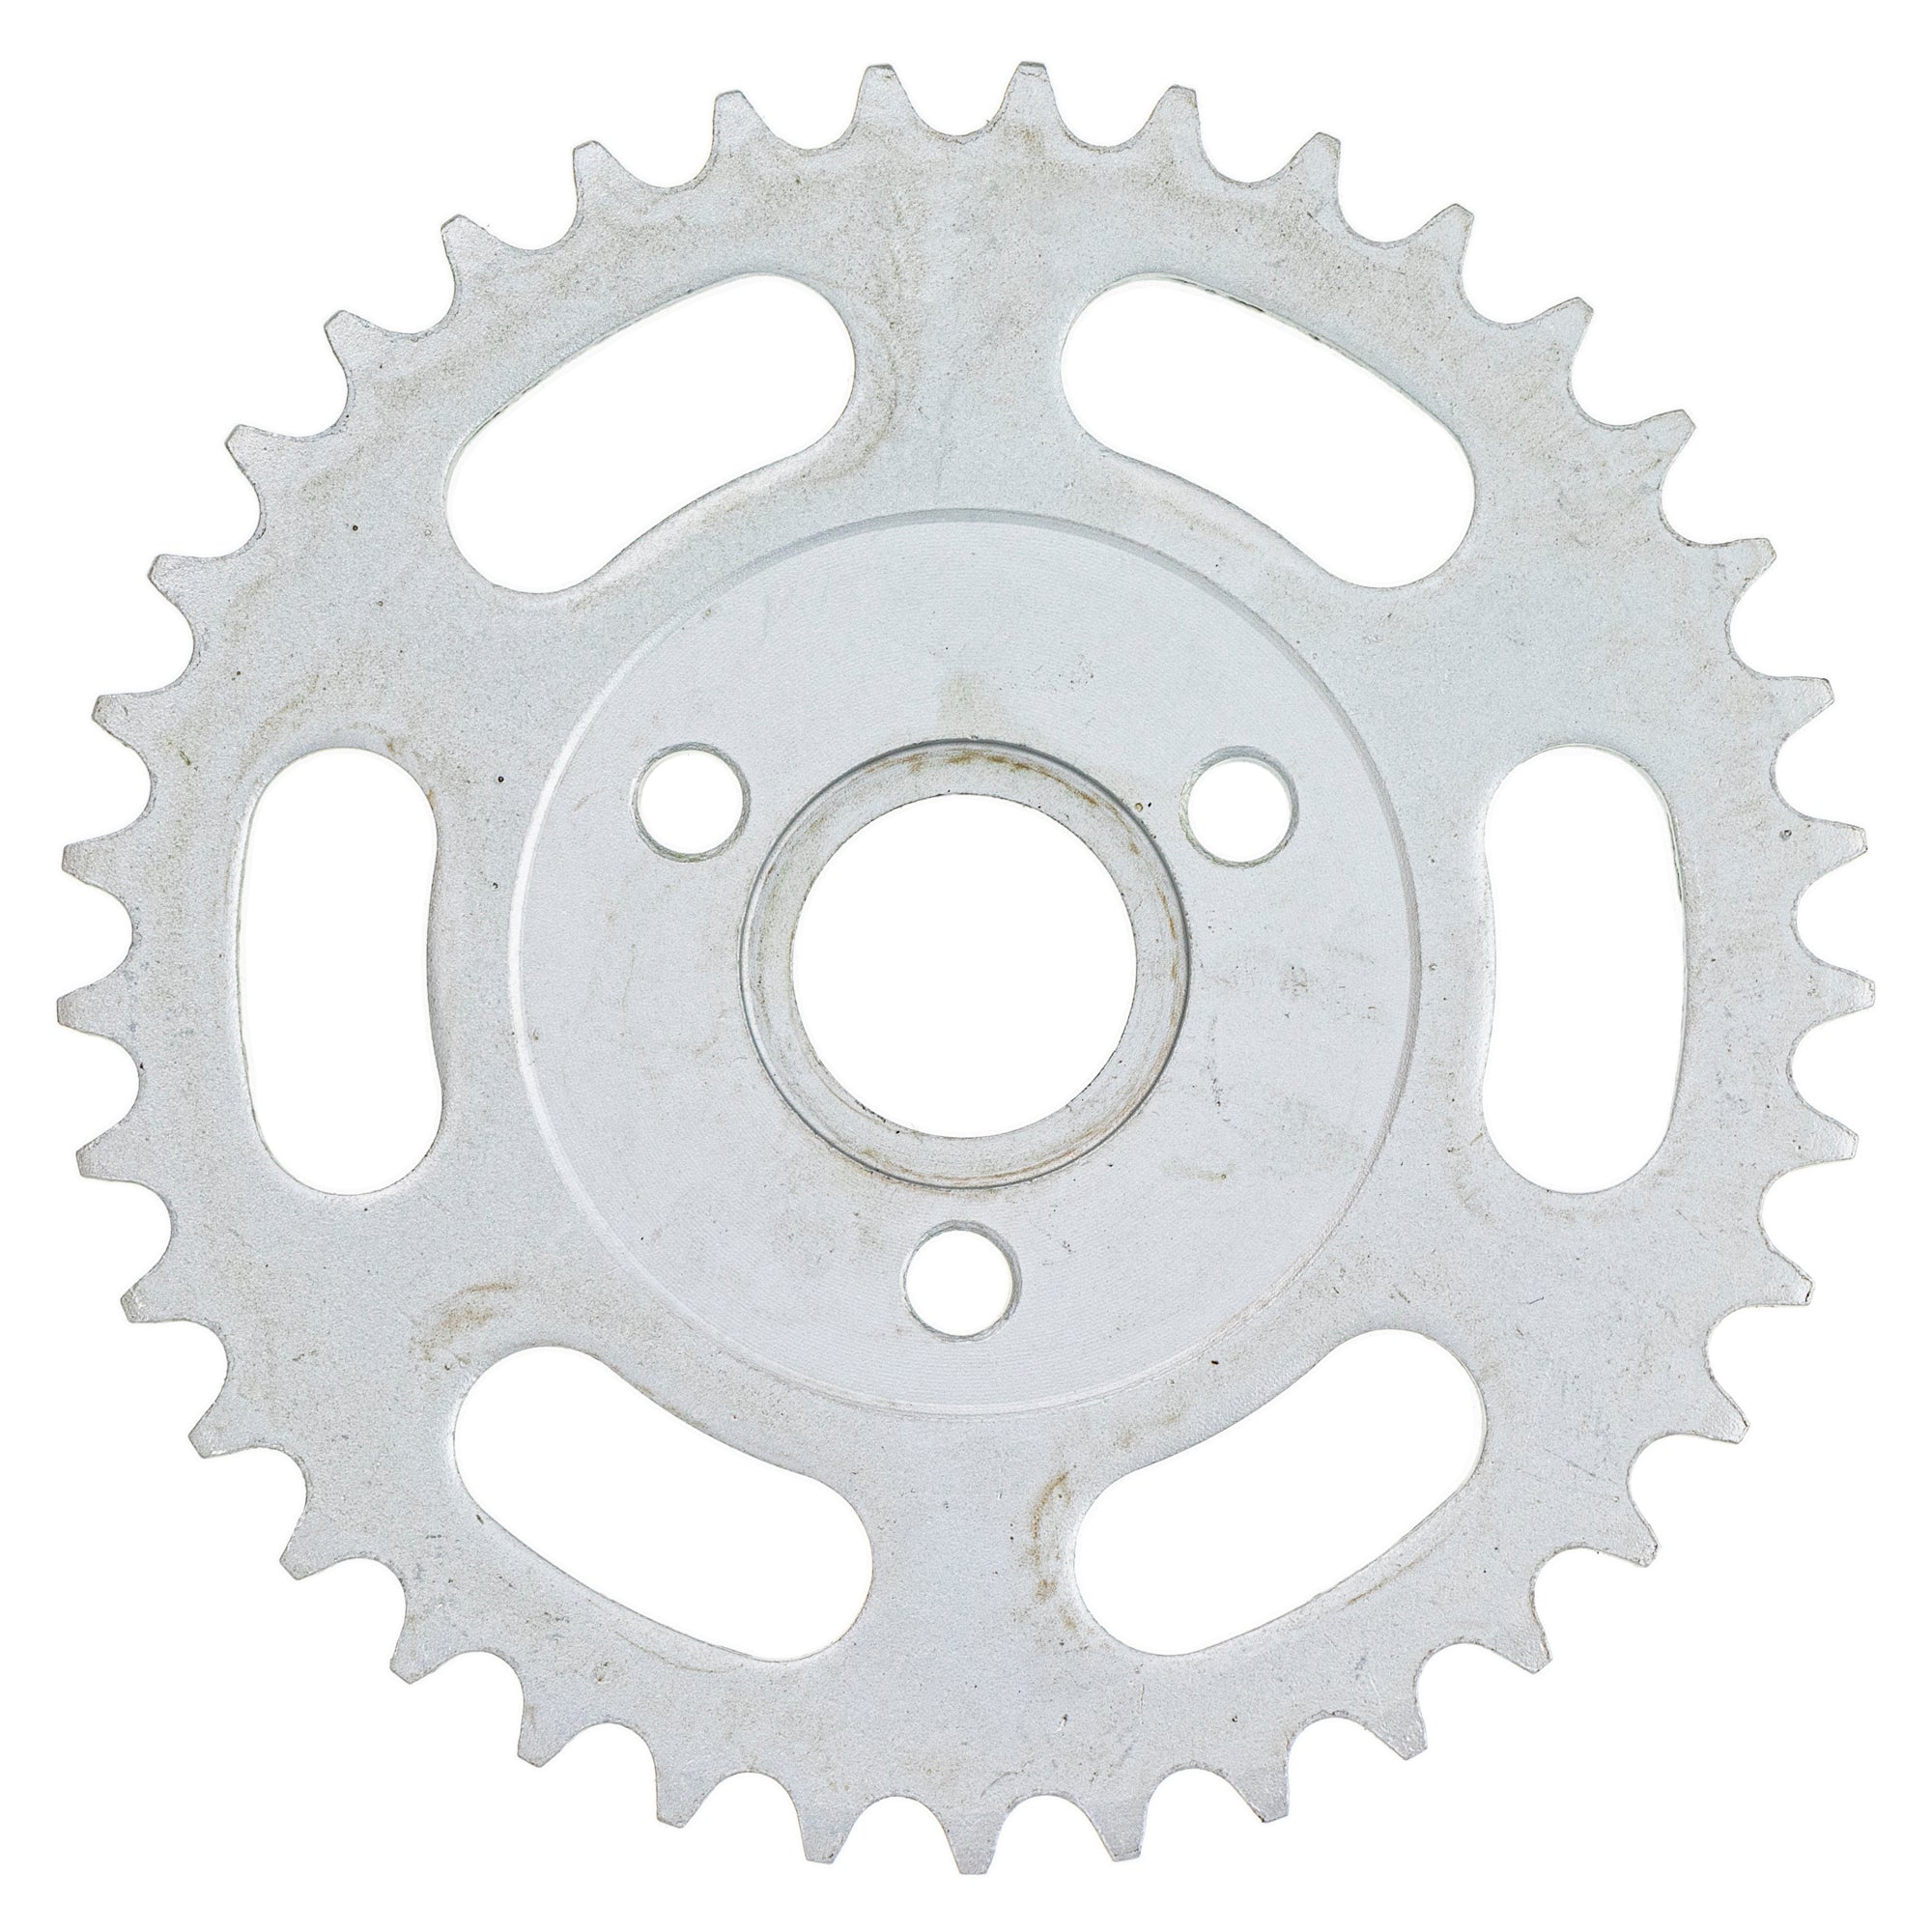 420 Pitch Front 13T Rear 37T Drive Sprocket Kit for Honda Z50R